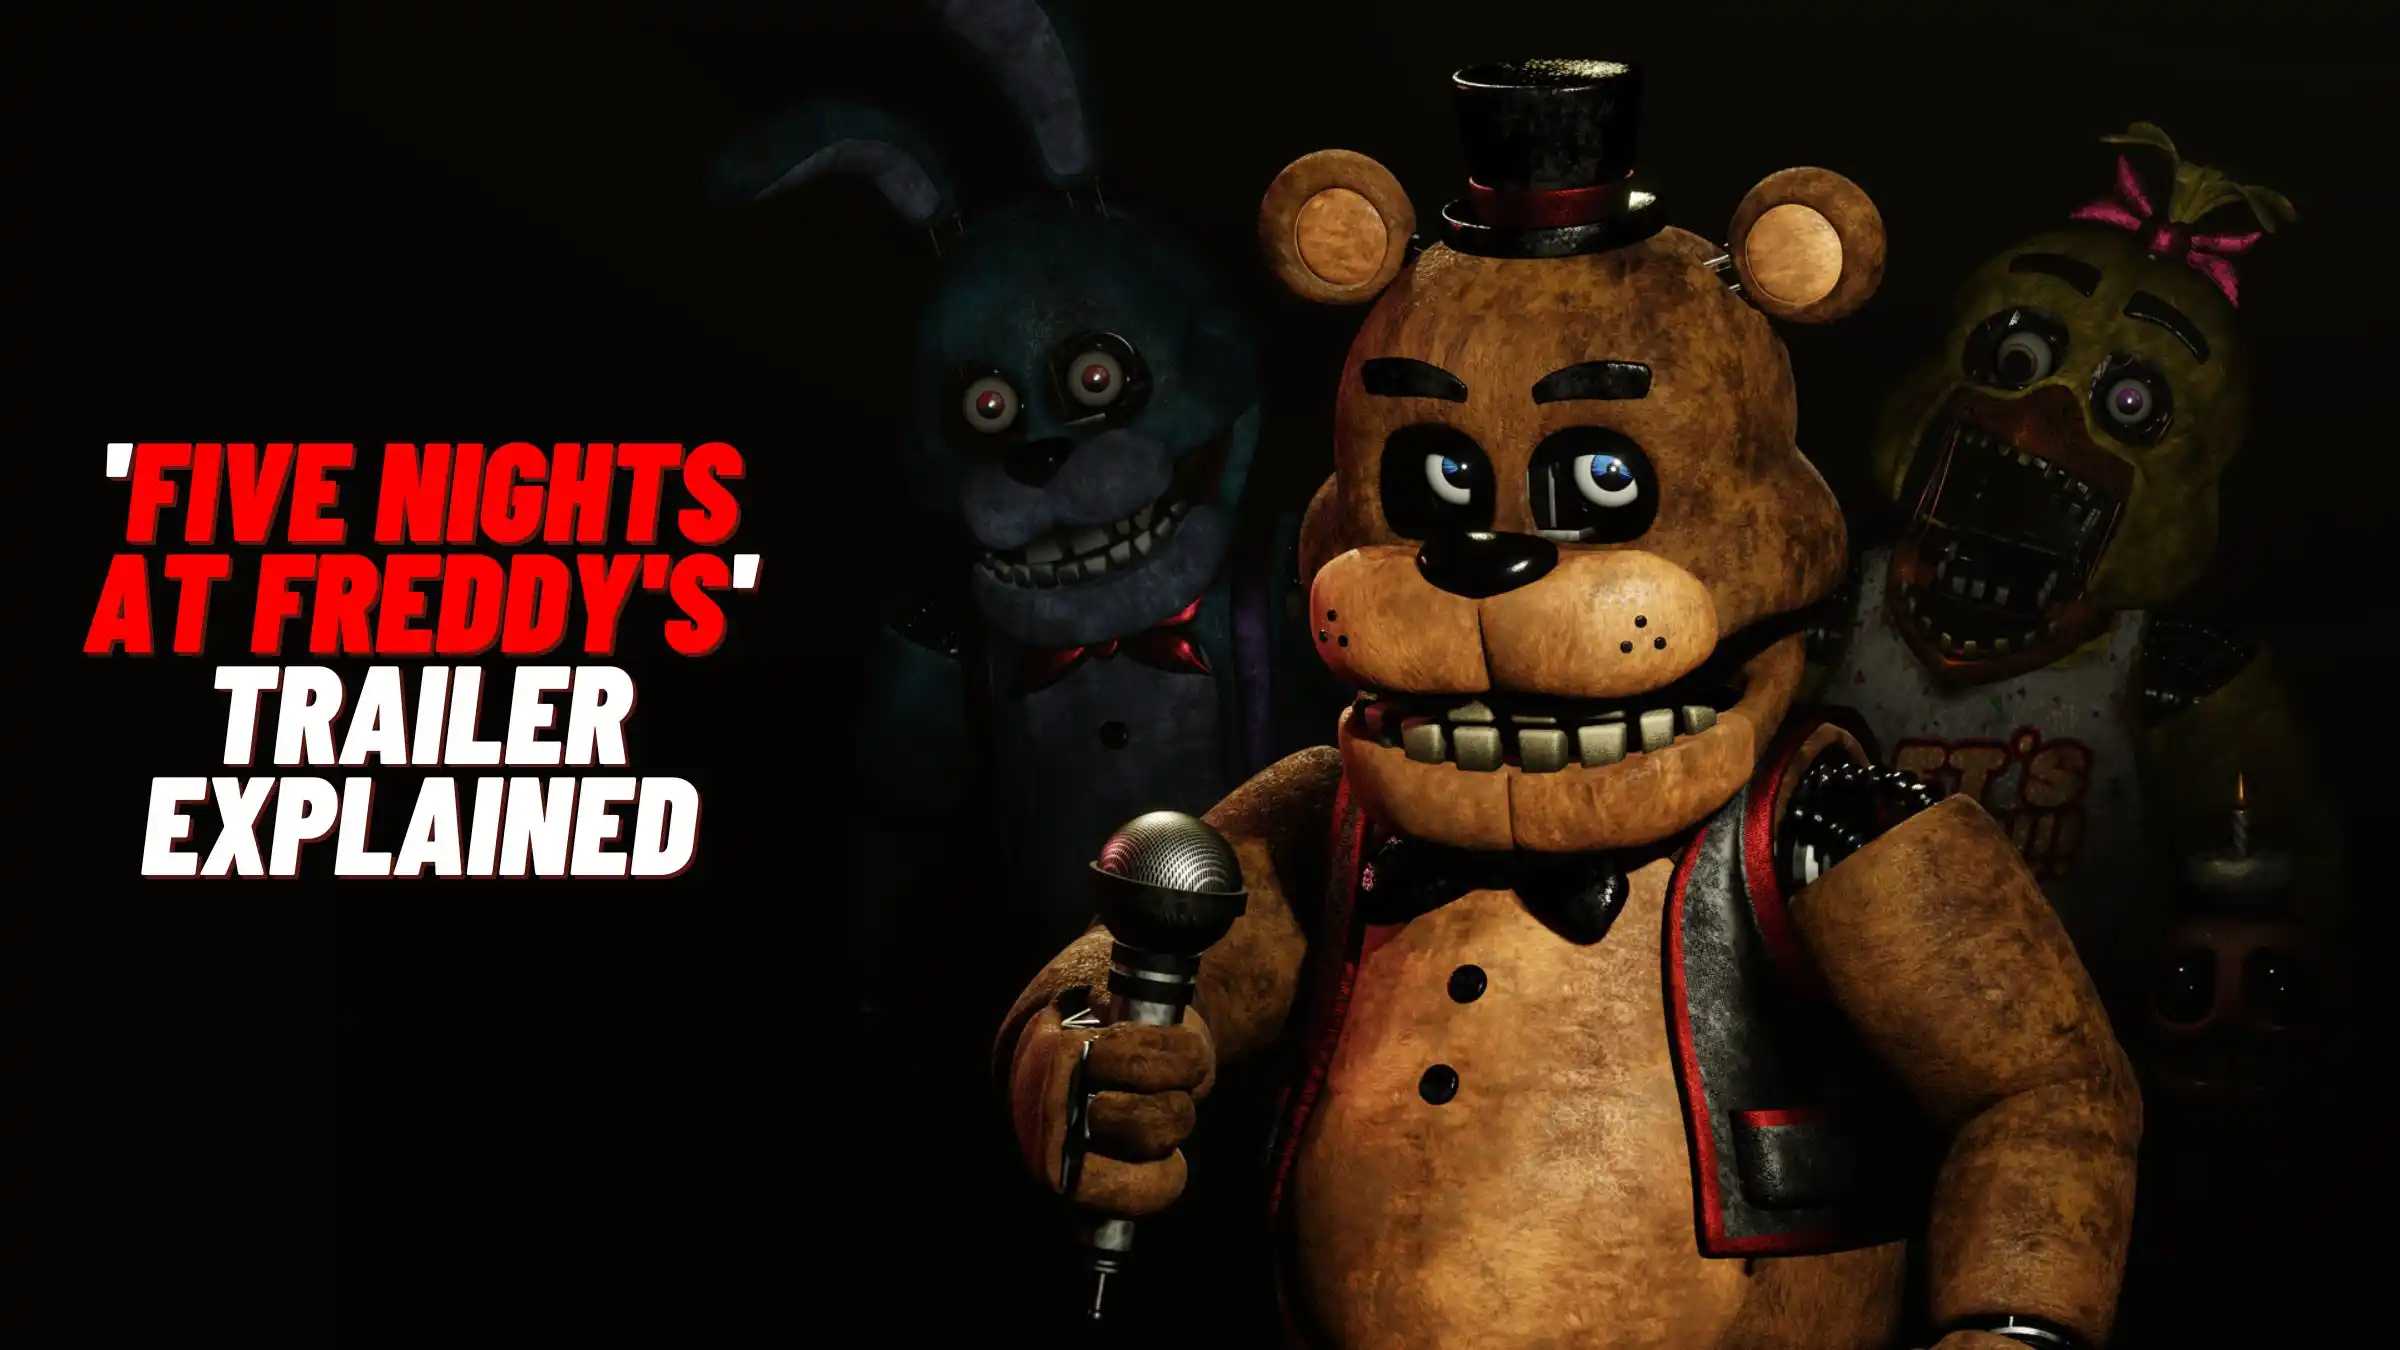 'Five Nights at Freddy's' Trailer Explained